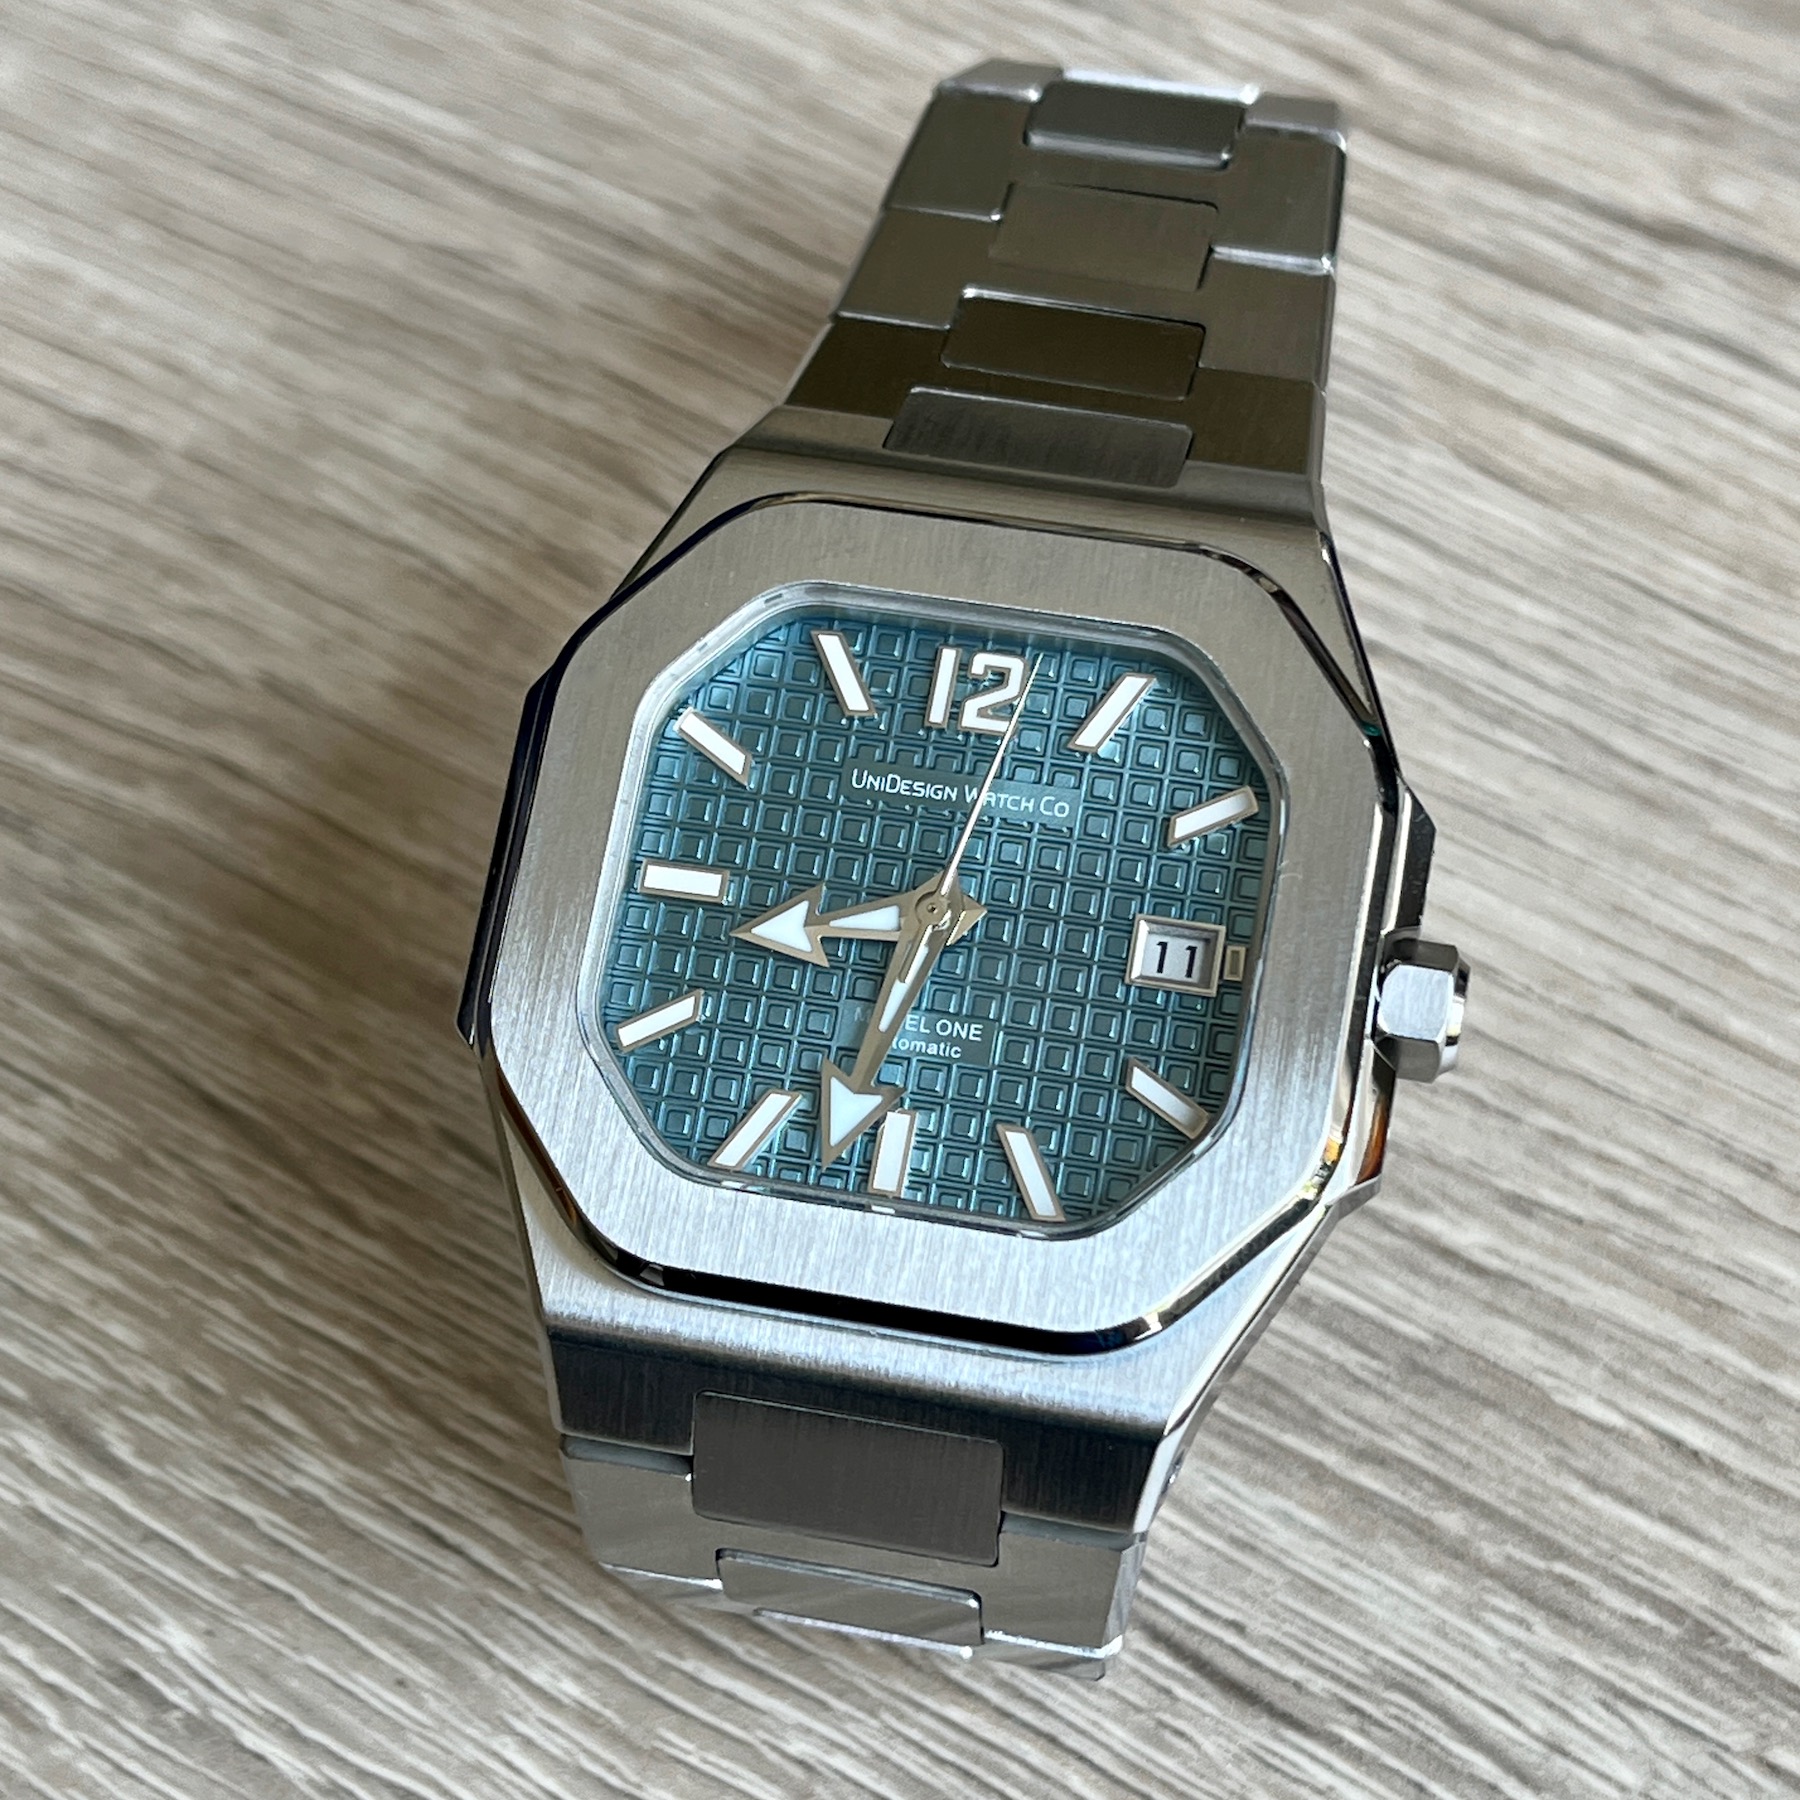 UniDesign Watch Co. Model One